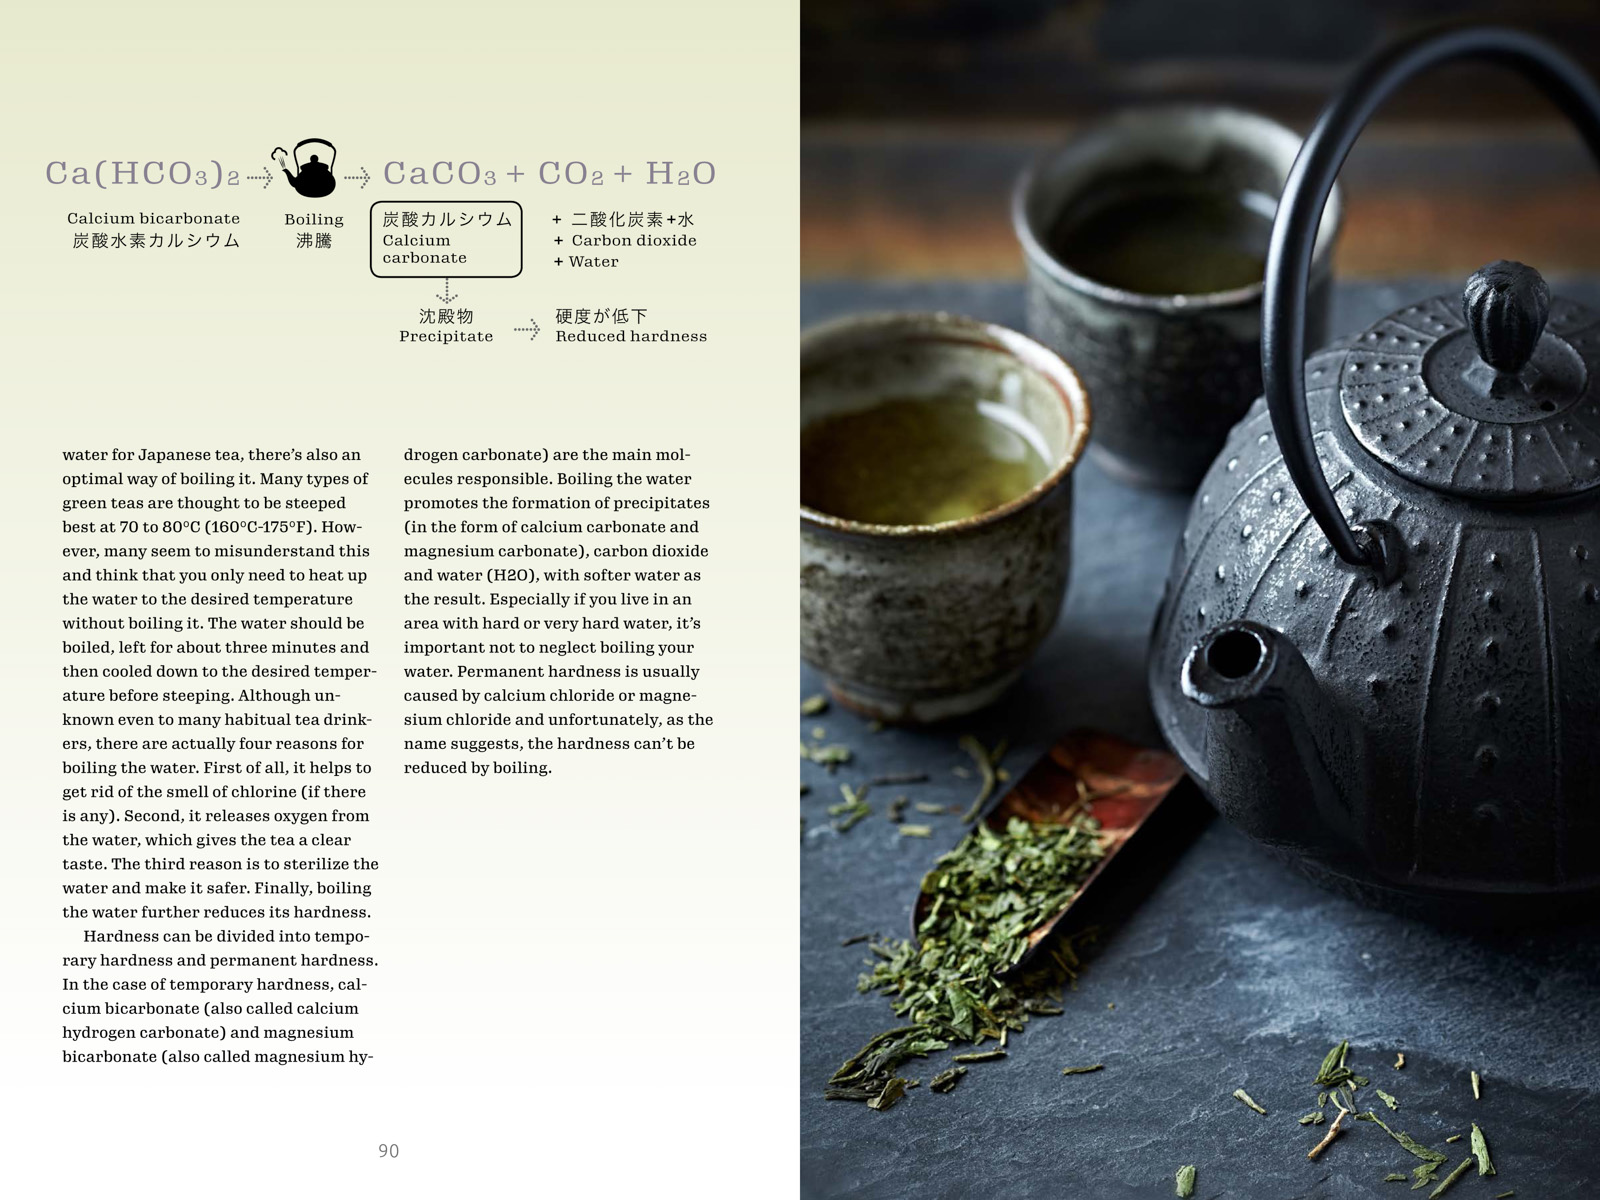 The Importance of Water Quality for Making Japanese Tea